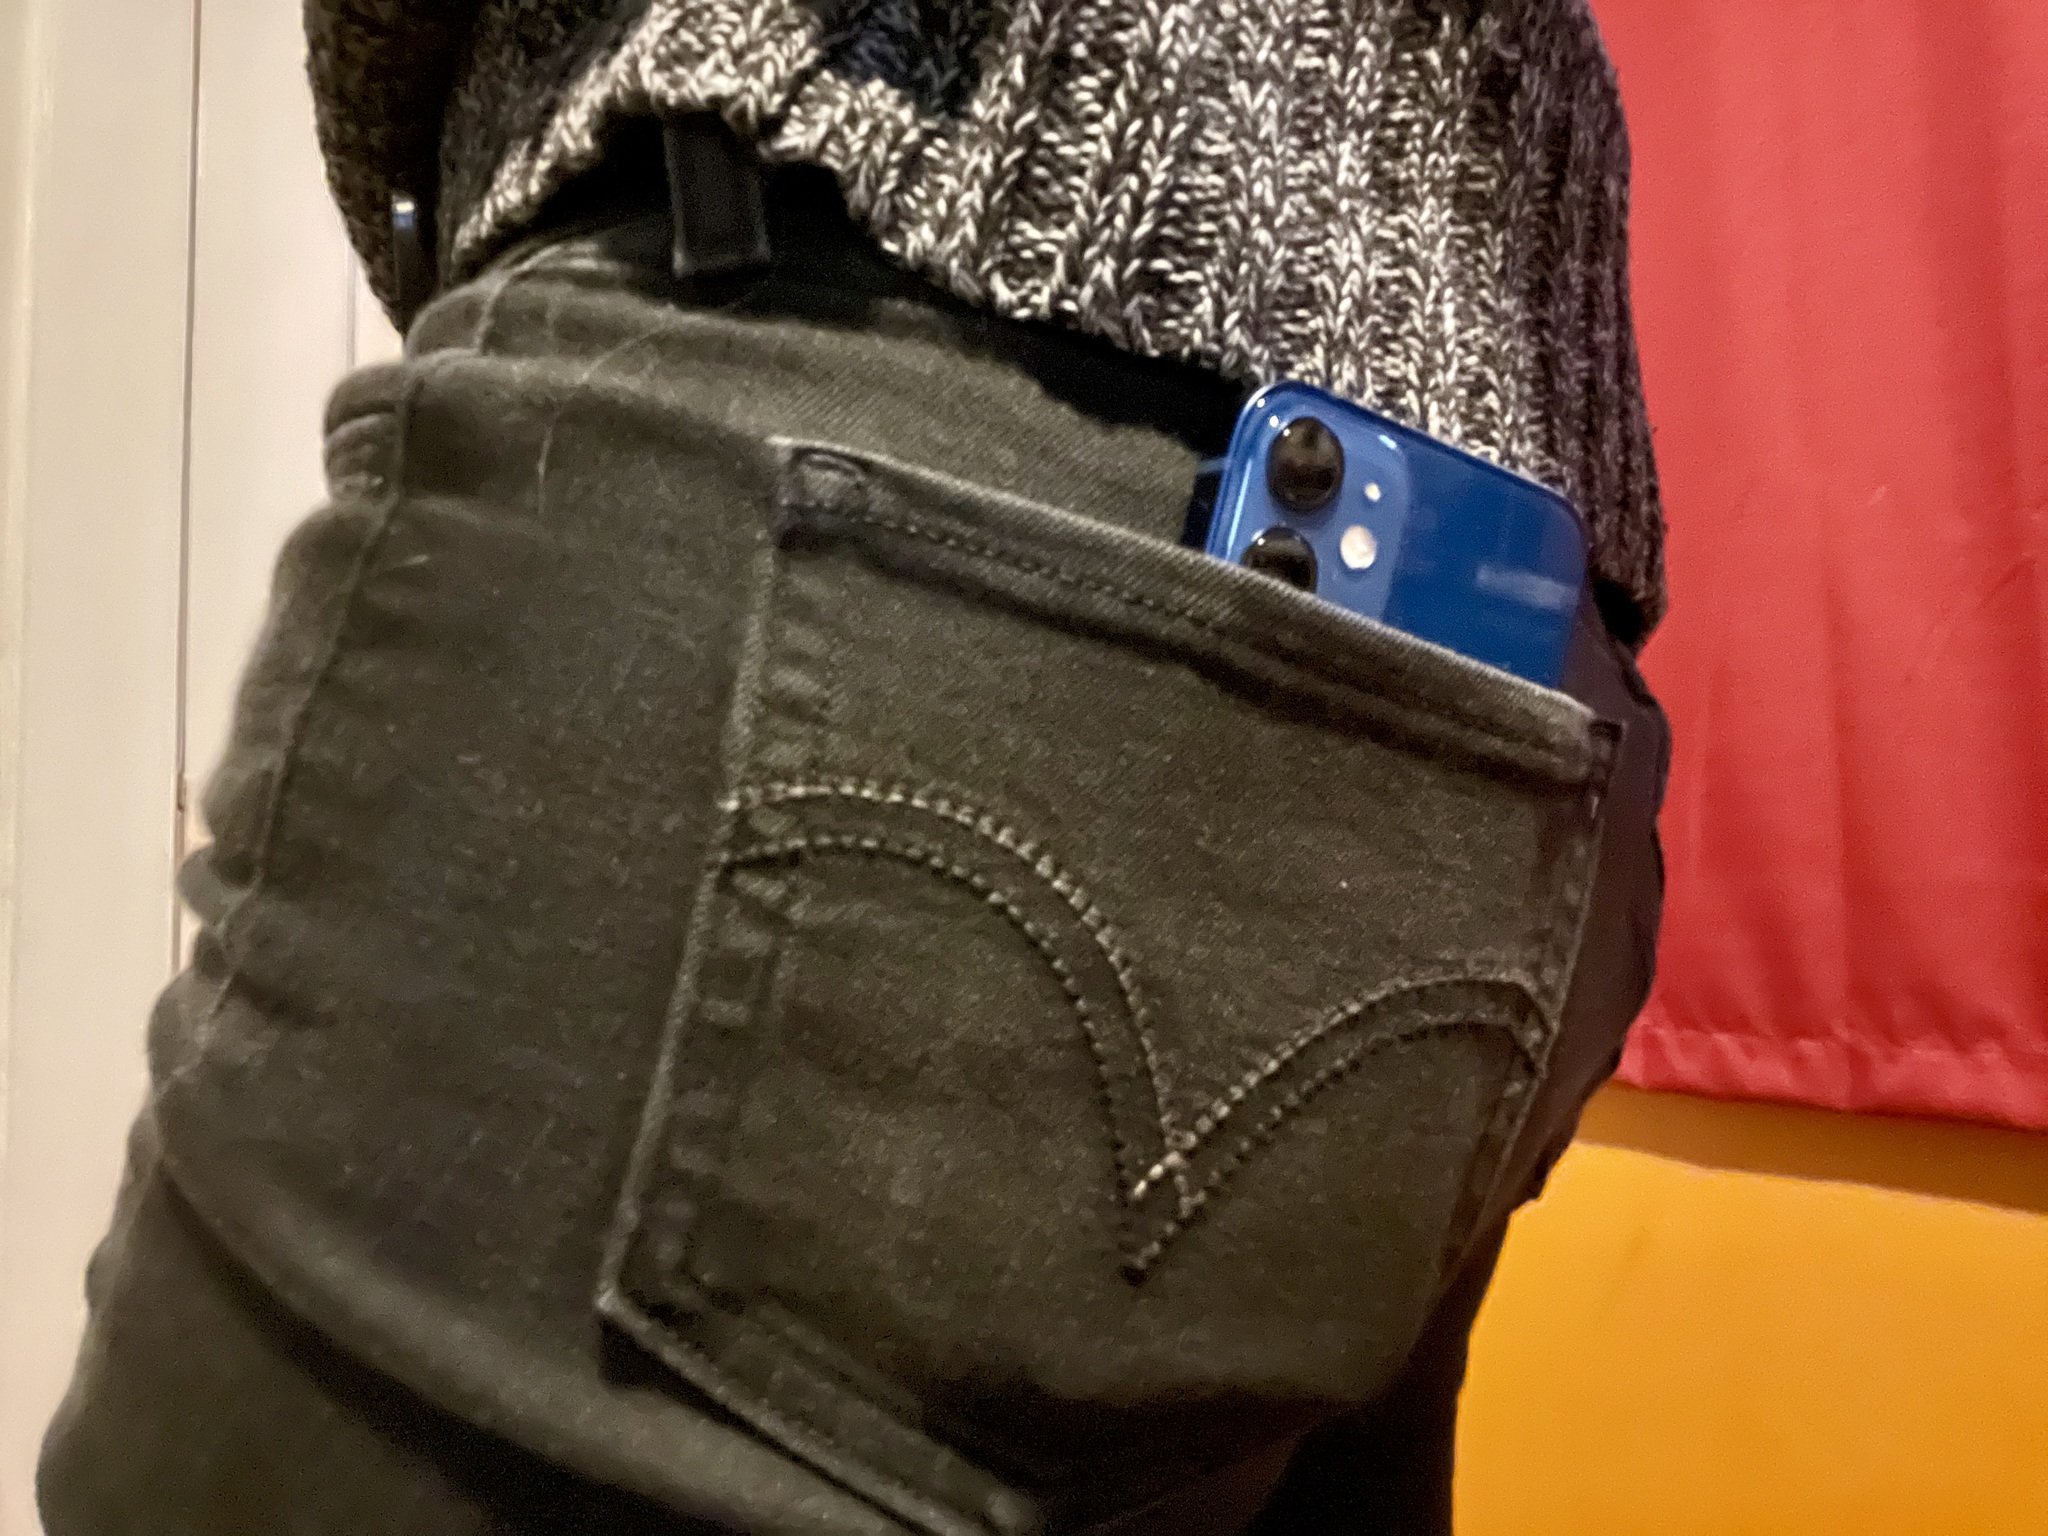 iPhone 12 mini in a back pocket of skinny jeans